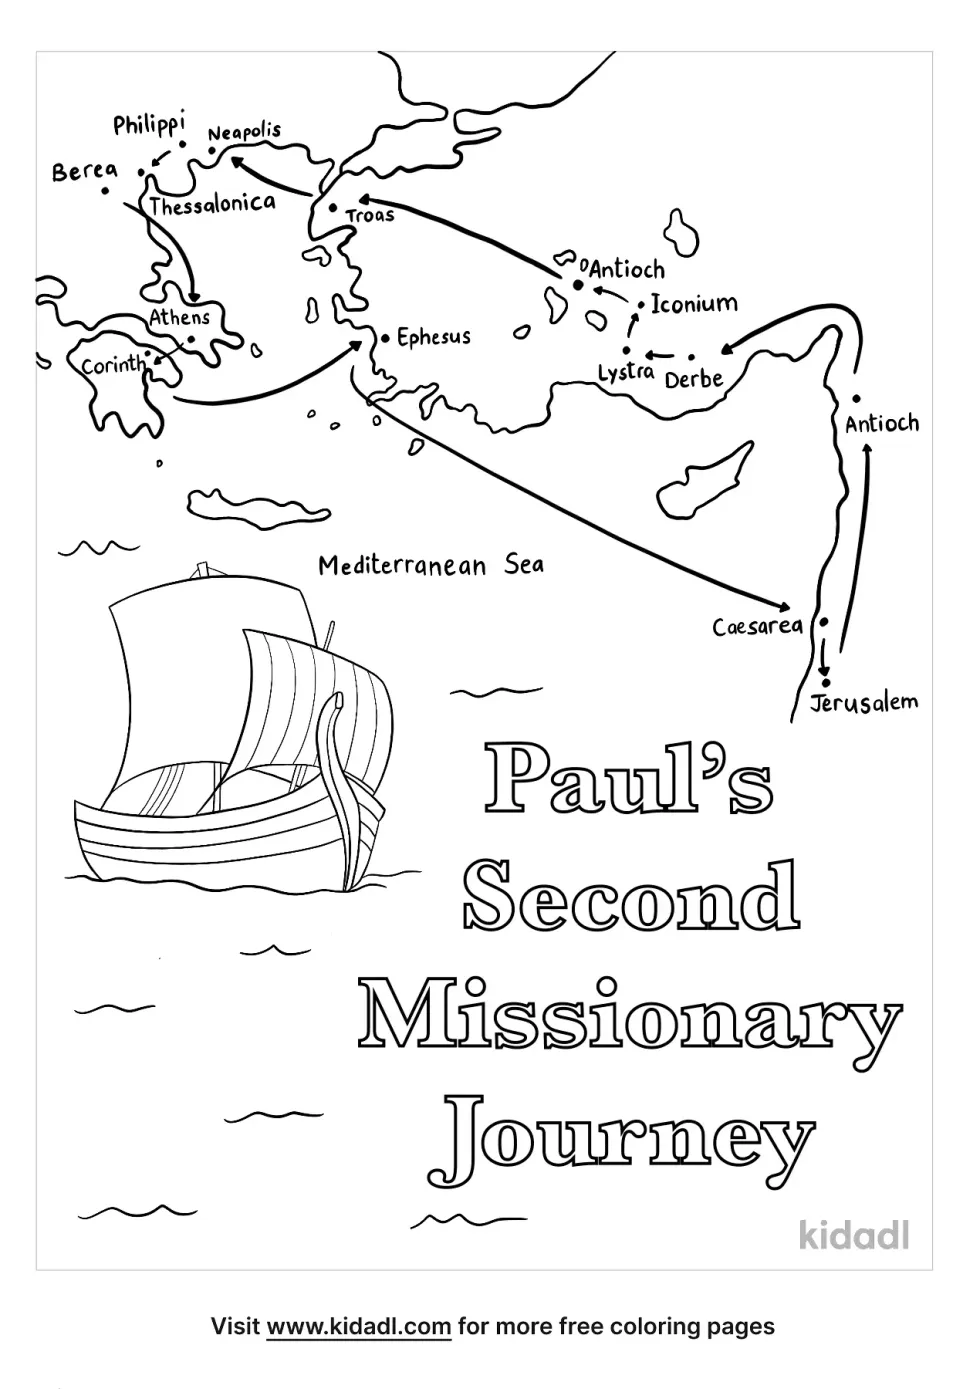 Paul's Second Missionary Journey Coloring Page